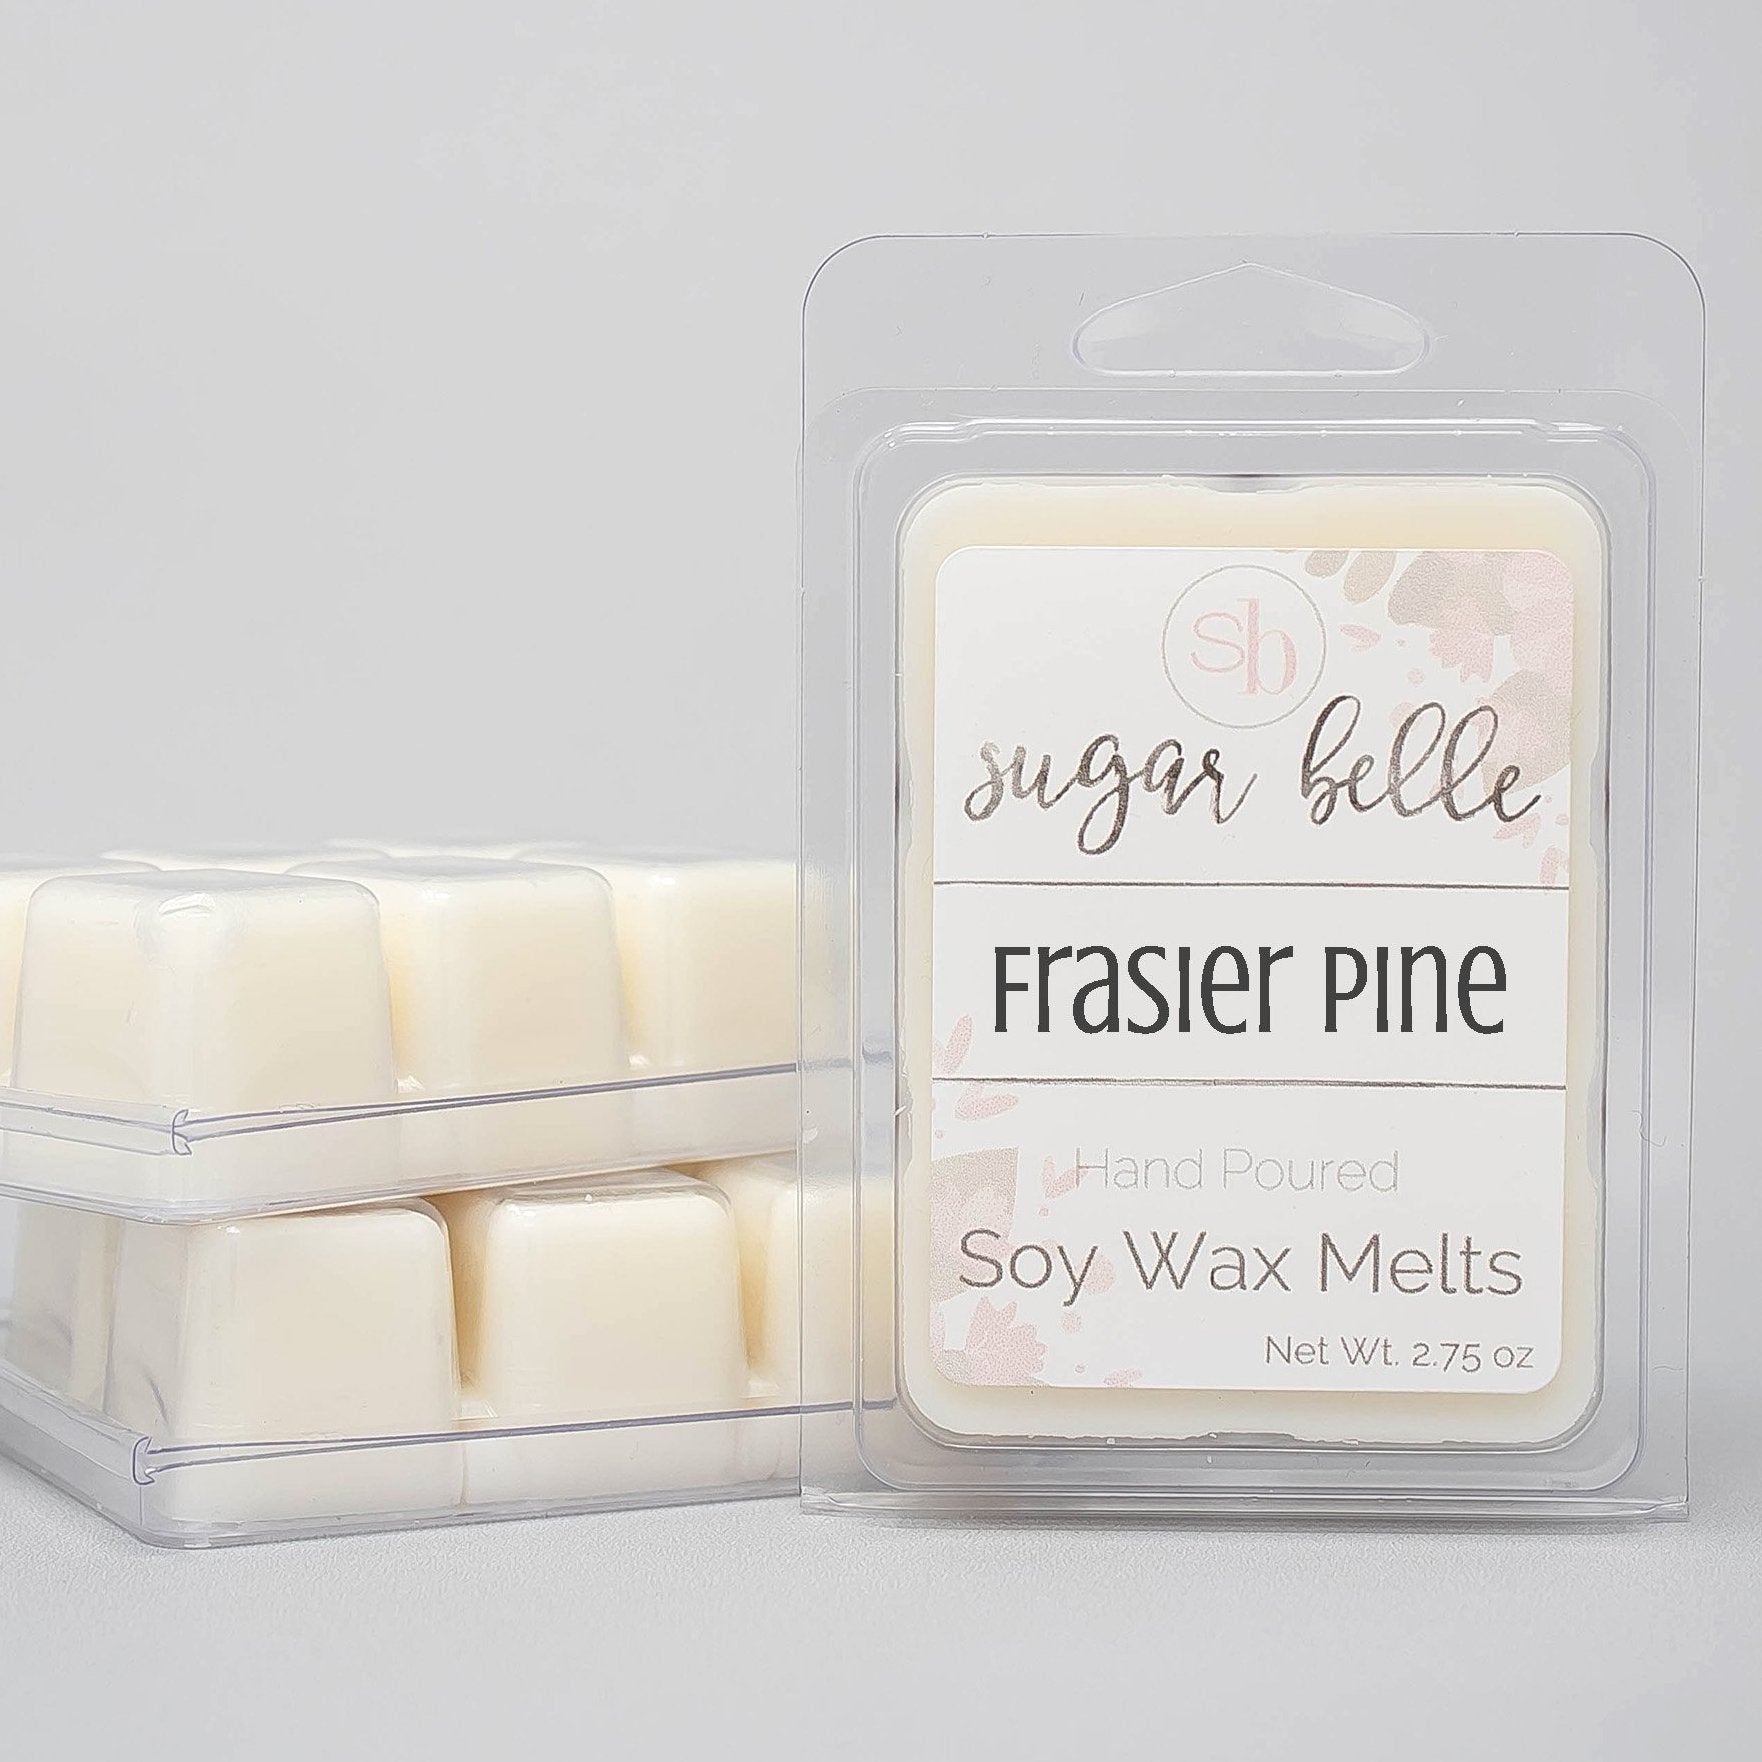 Winter Pine Scented Snap Bars Soy Wax Melts Wax Burner Melts Scented Soy  Melts 